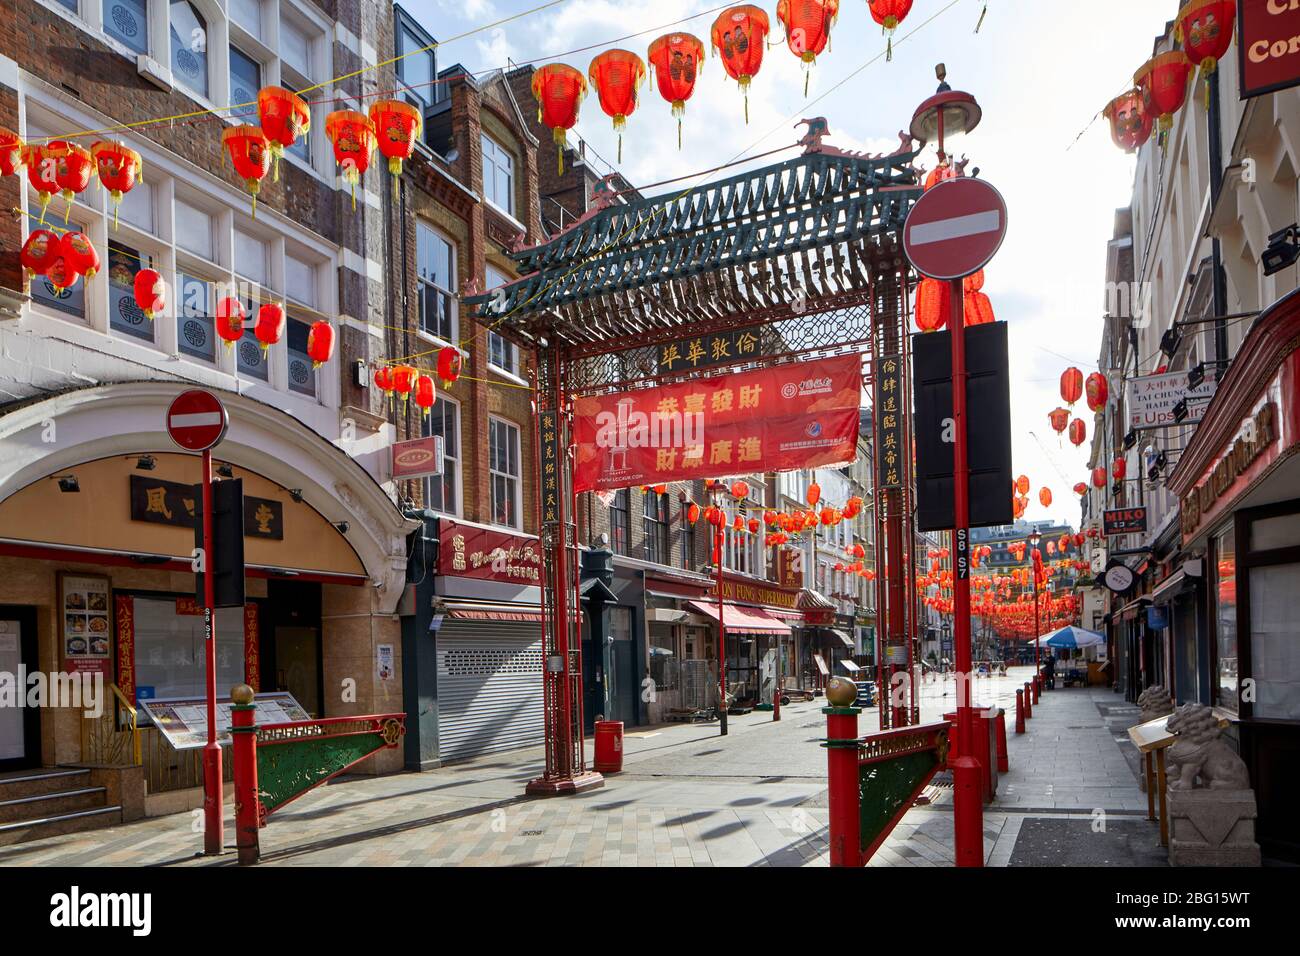 Empty deserted environment of Gerard Street, Chinatown during restricted travel of Coronavirus COVID-19 Lockdown in London W1, England Stock Photo